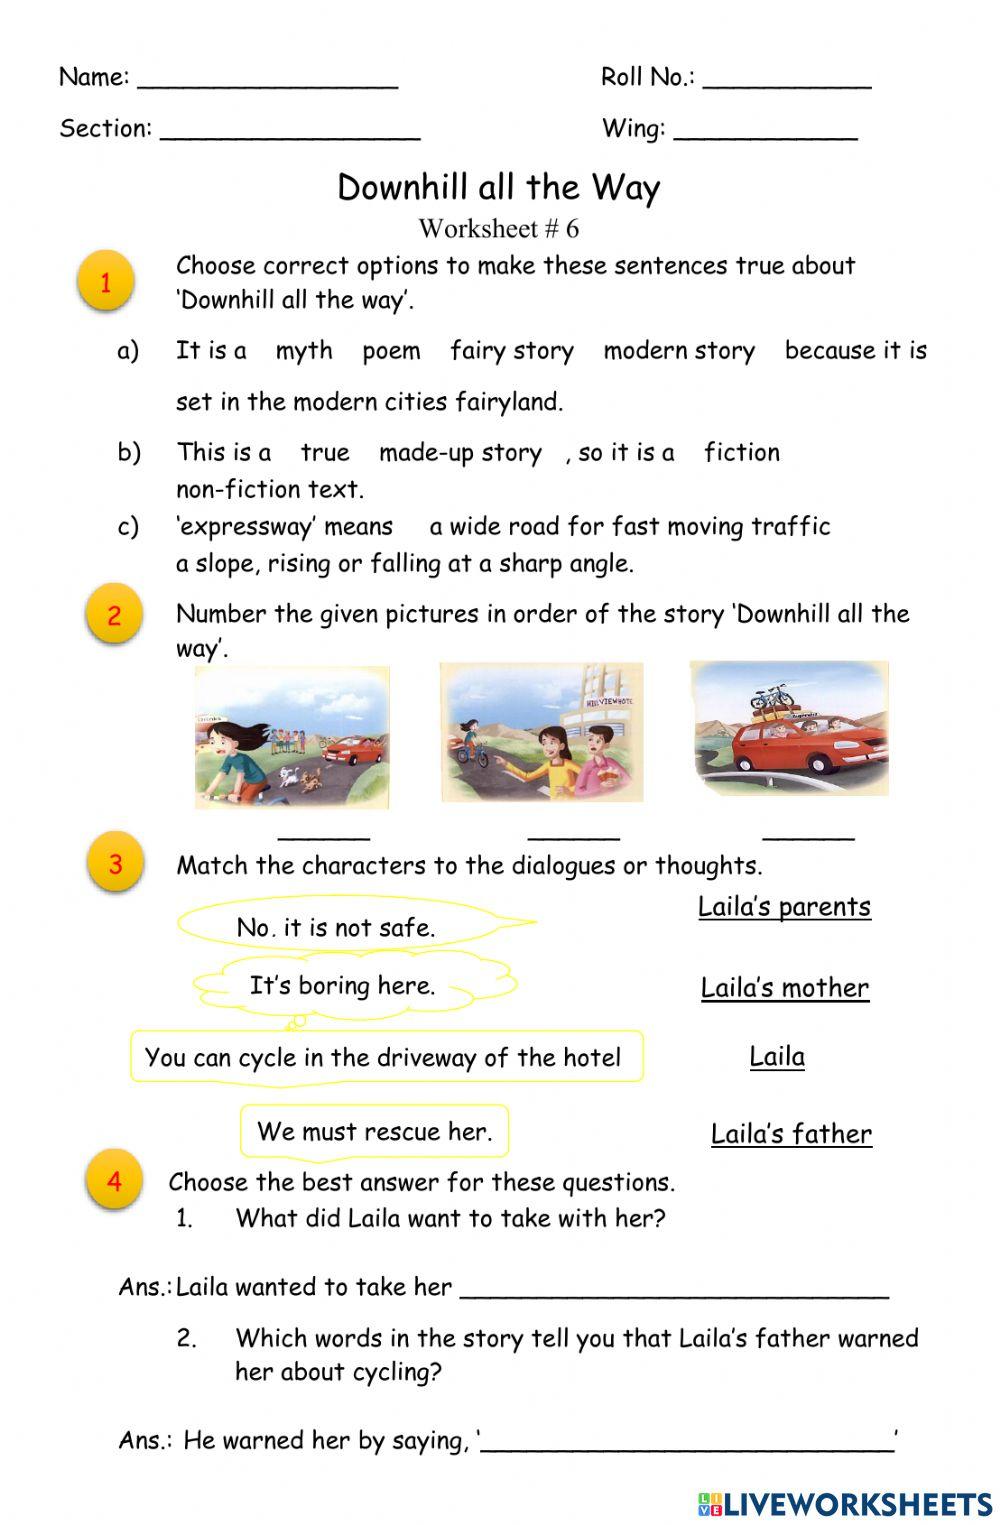 Comprehension of Text